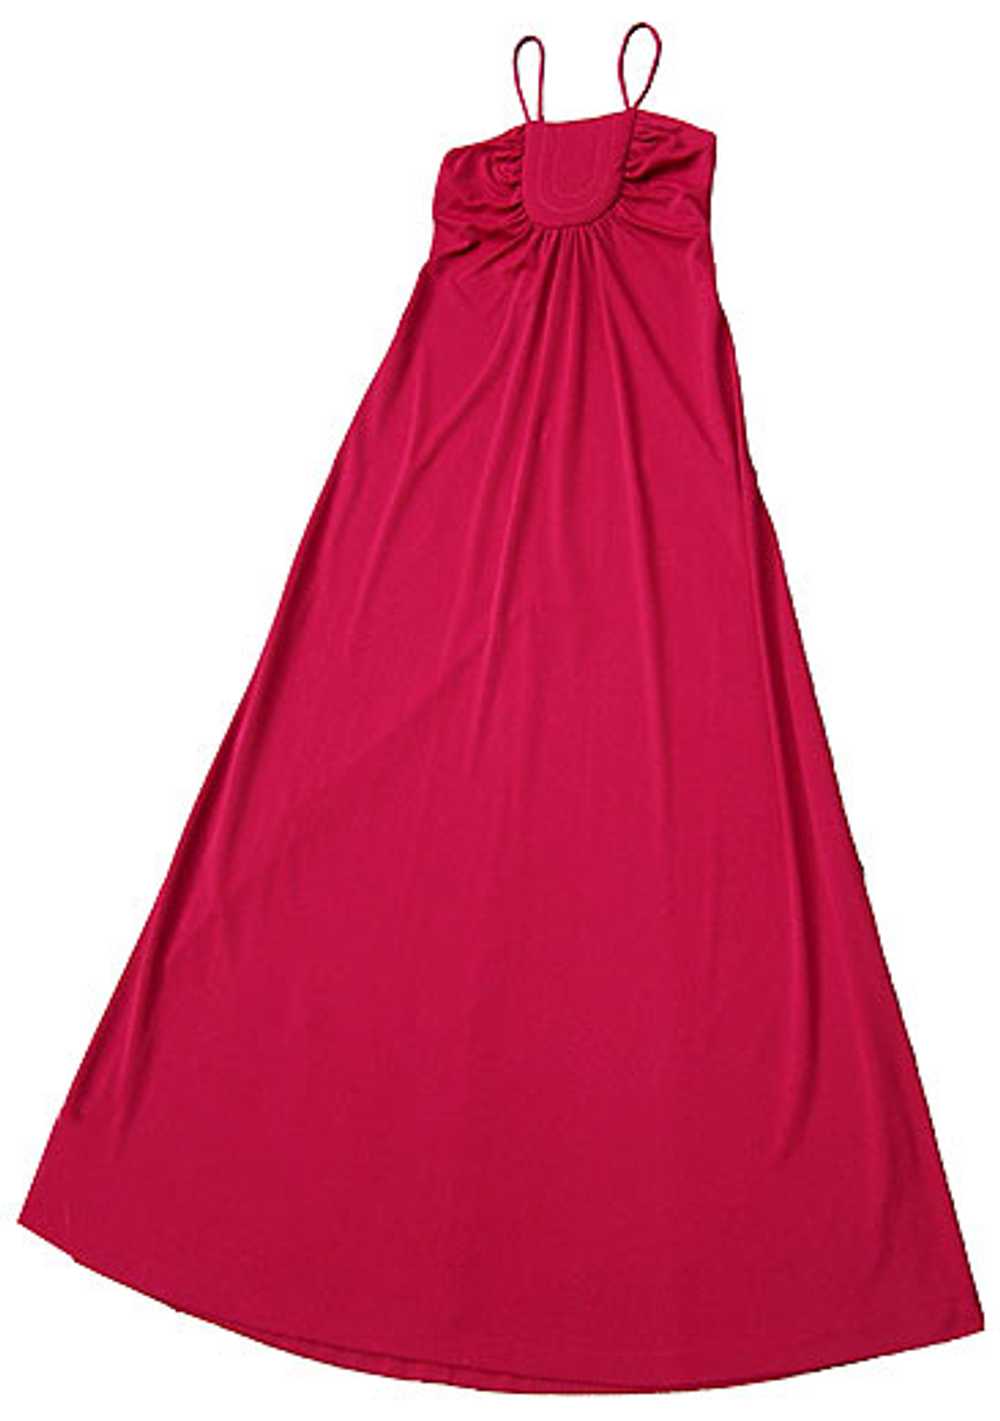 Cranberry trapunto gown - image 3